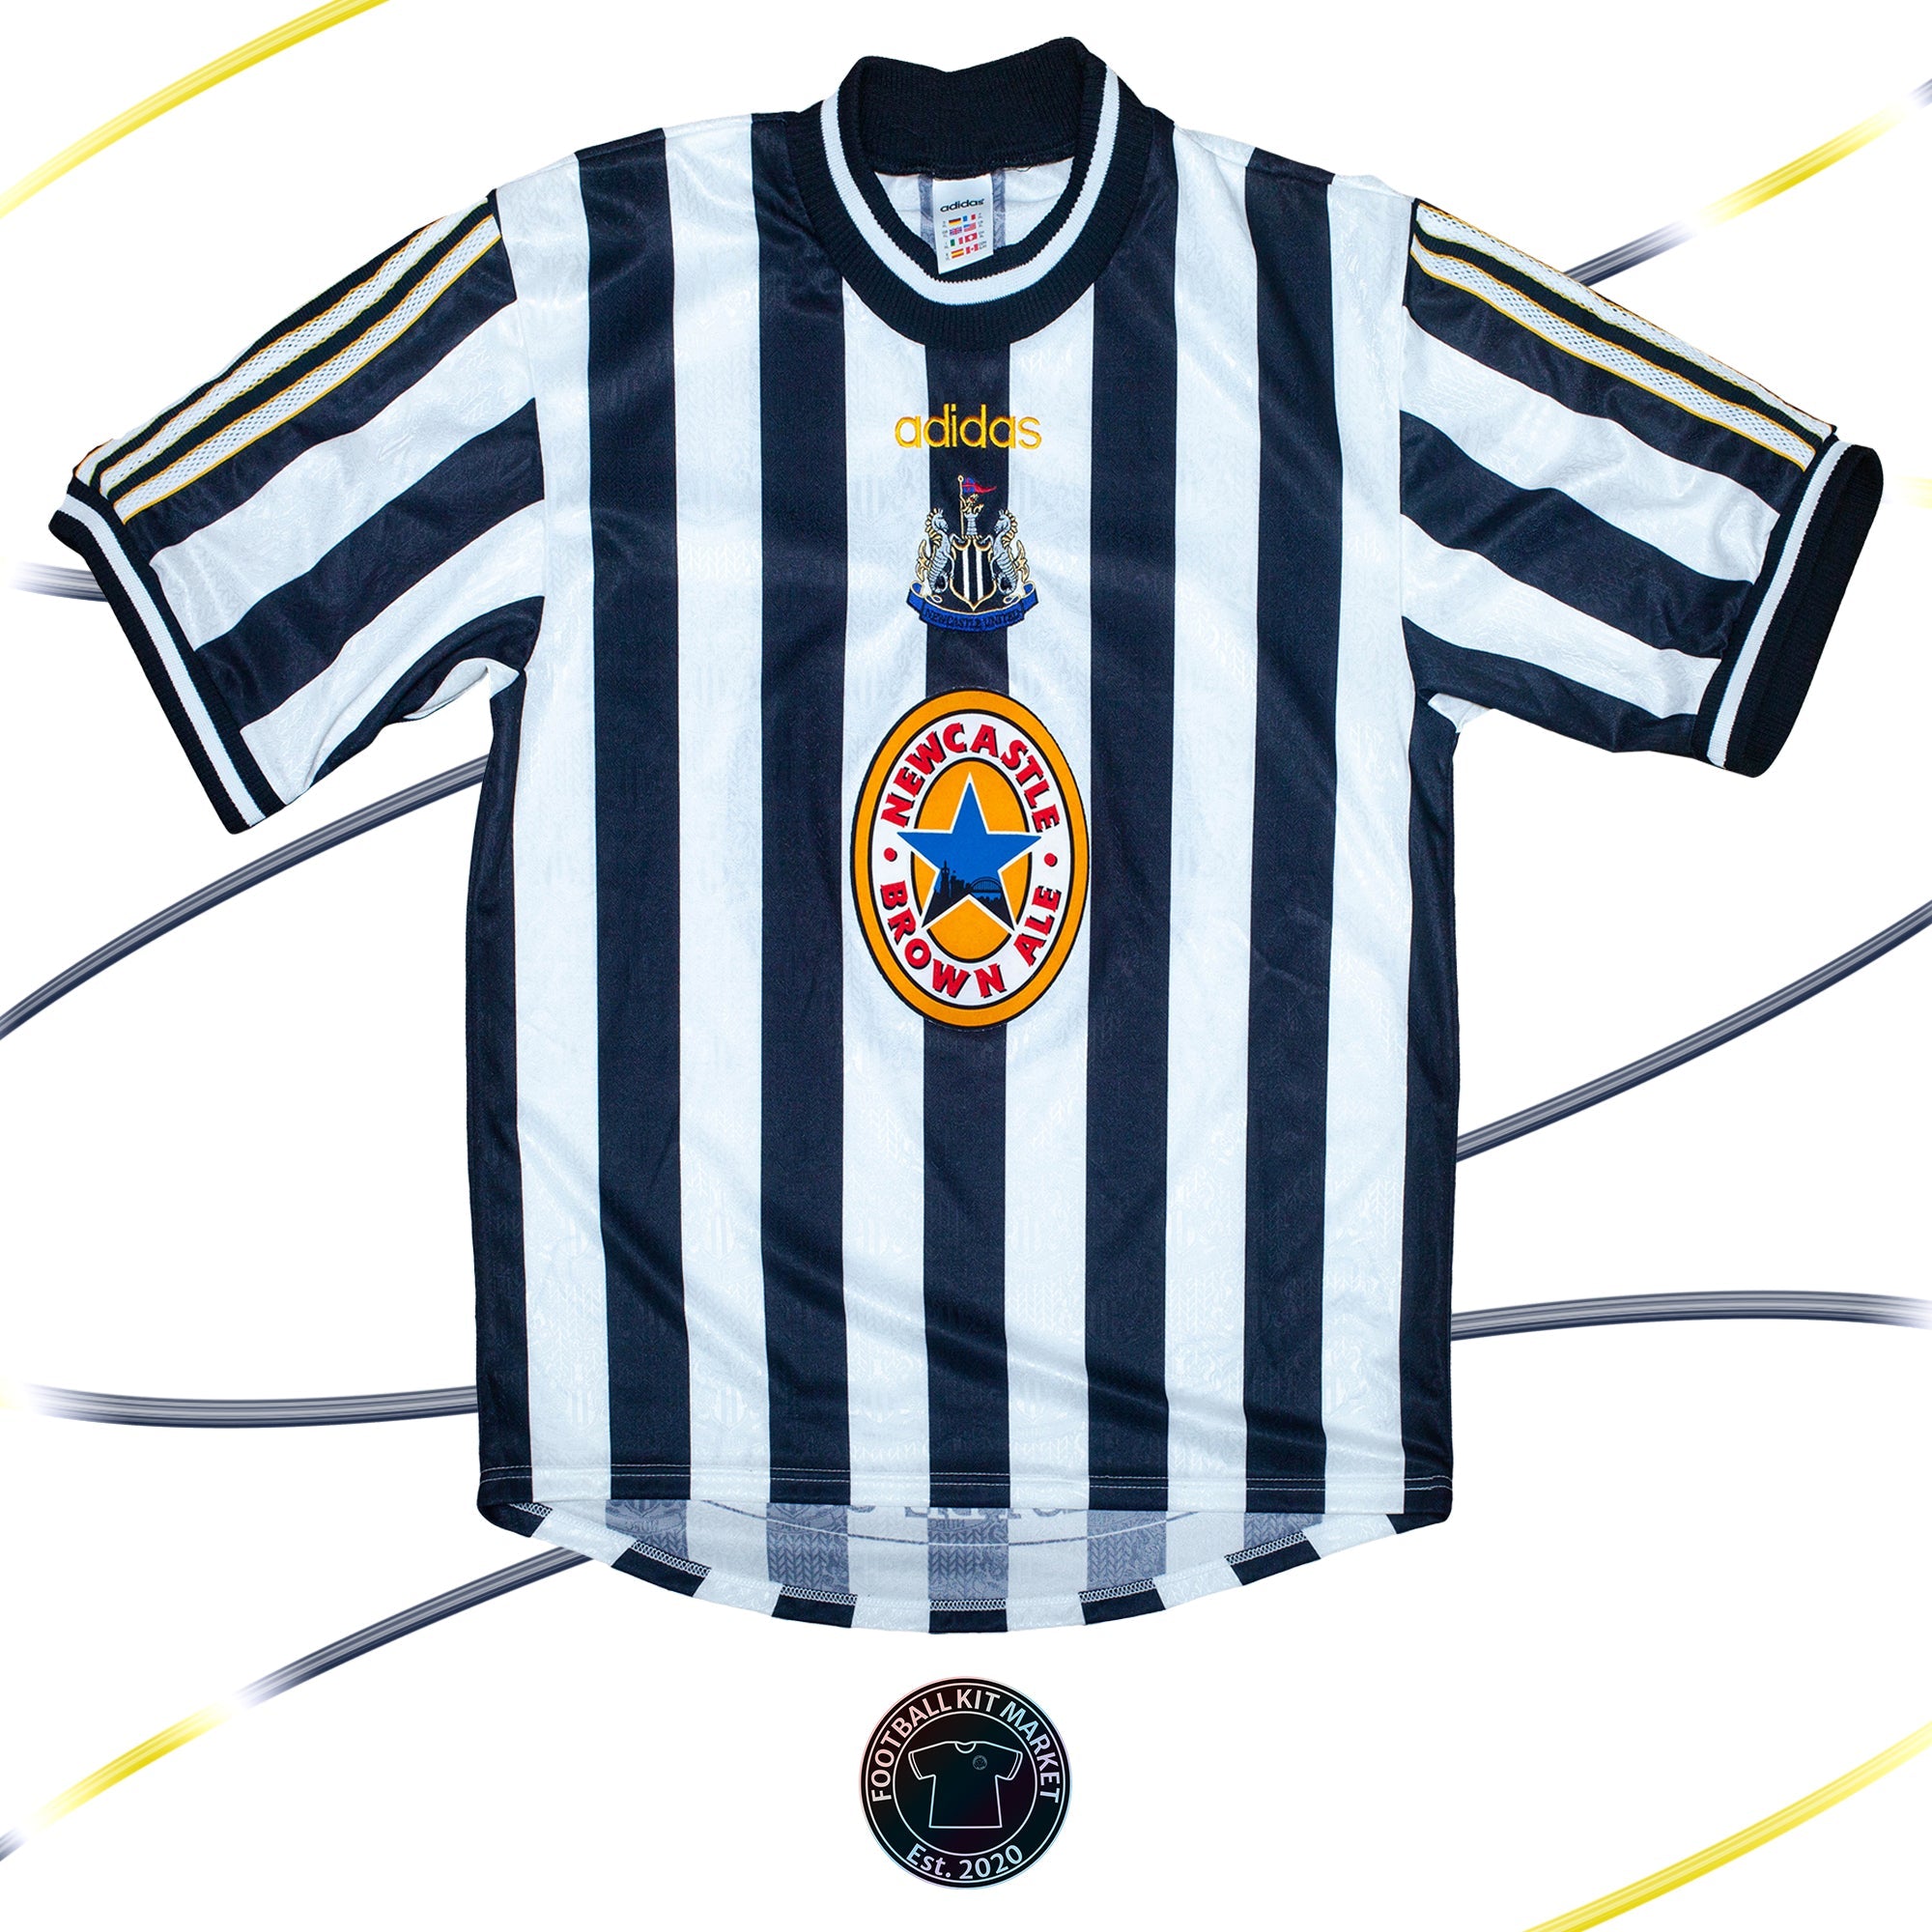 Genuine NEWCASTLE UNITED Home (1997-1998) - ADIDAS (XL) - Product Image from Football Kit Market